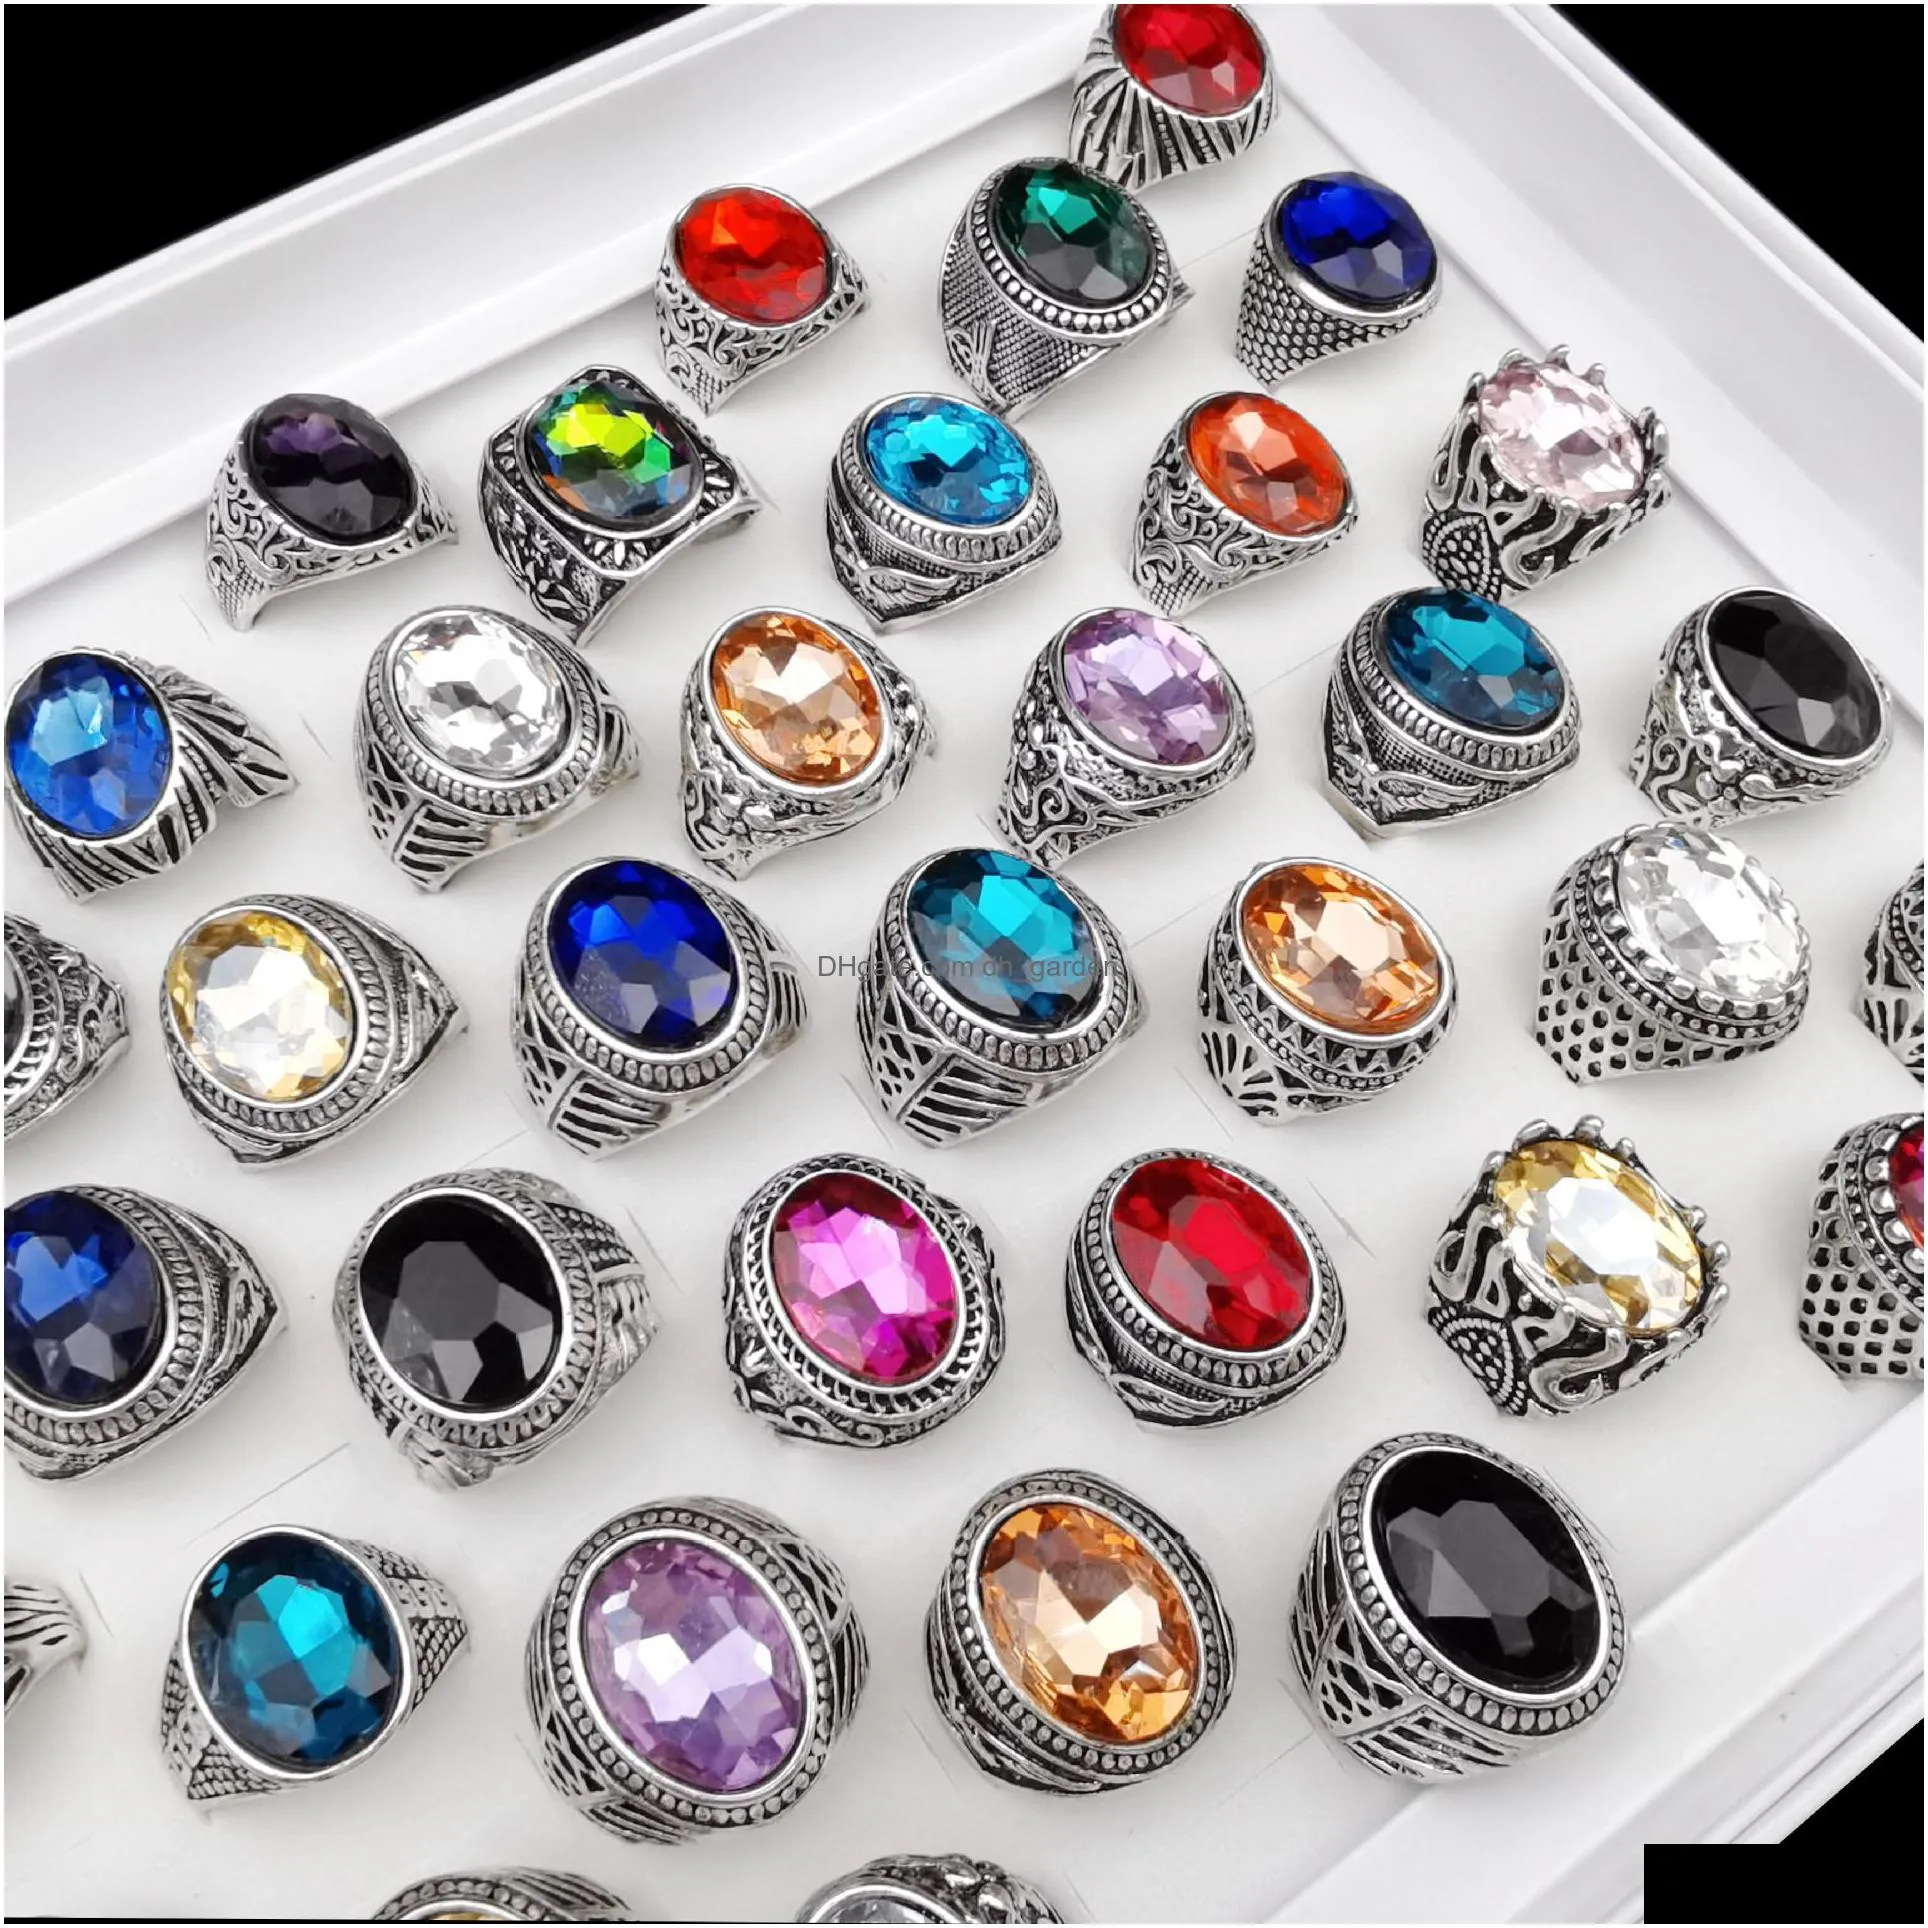 50pcs/lot luxury gemstone rings punk vintage ring for women men gift jewelry with emerald sapphire ruby gemstone rings for wedding